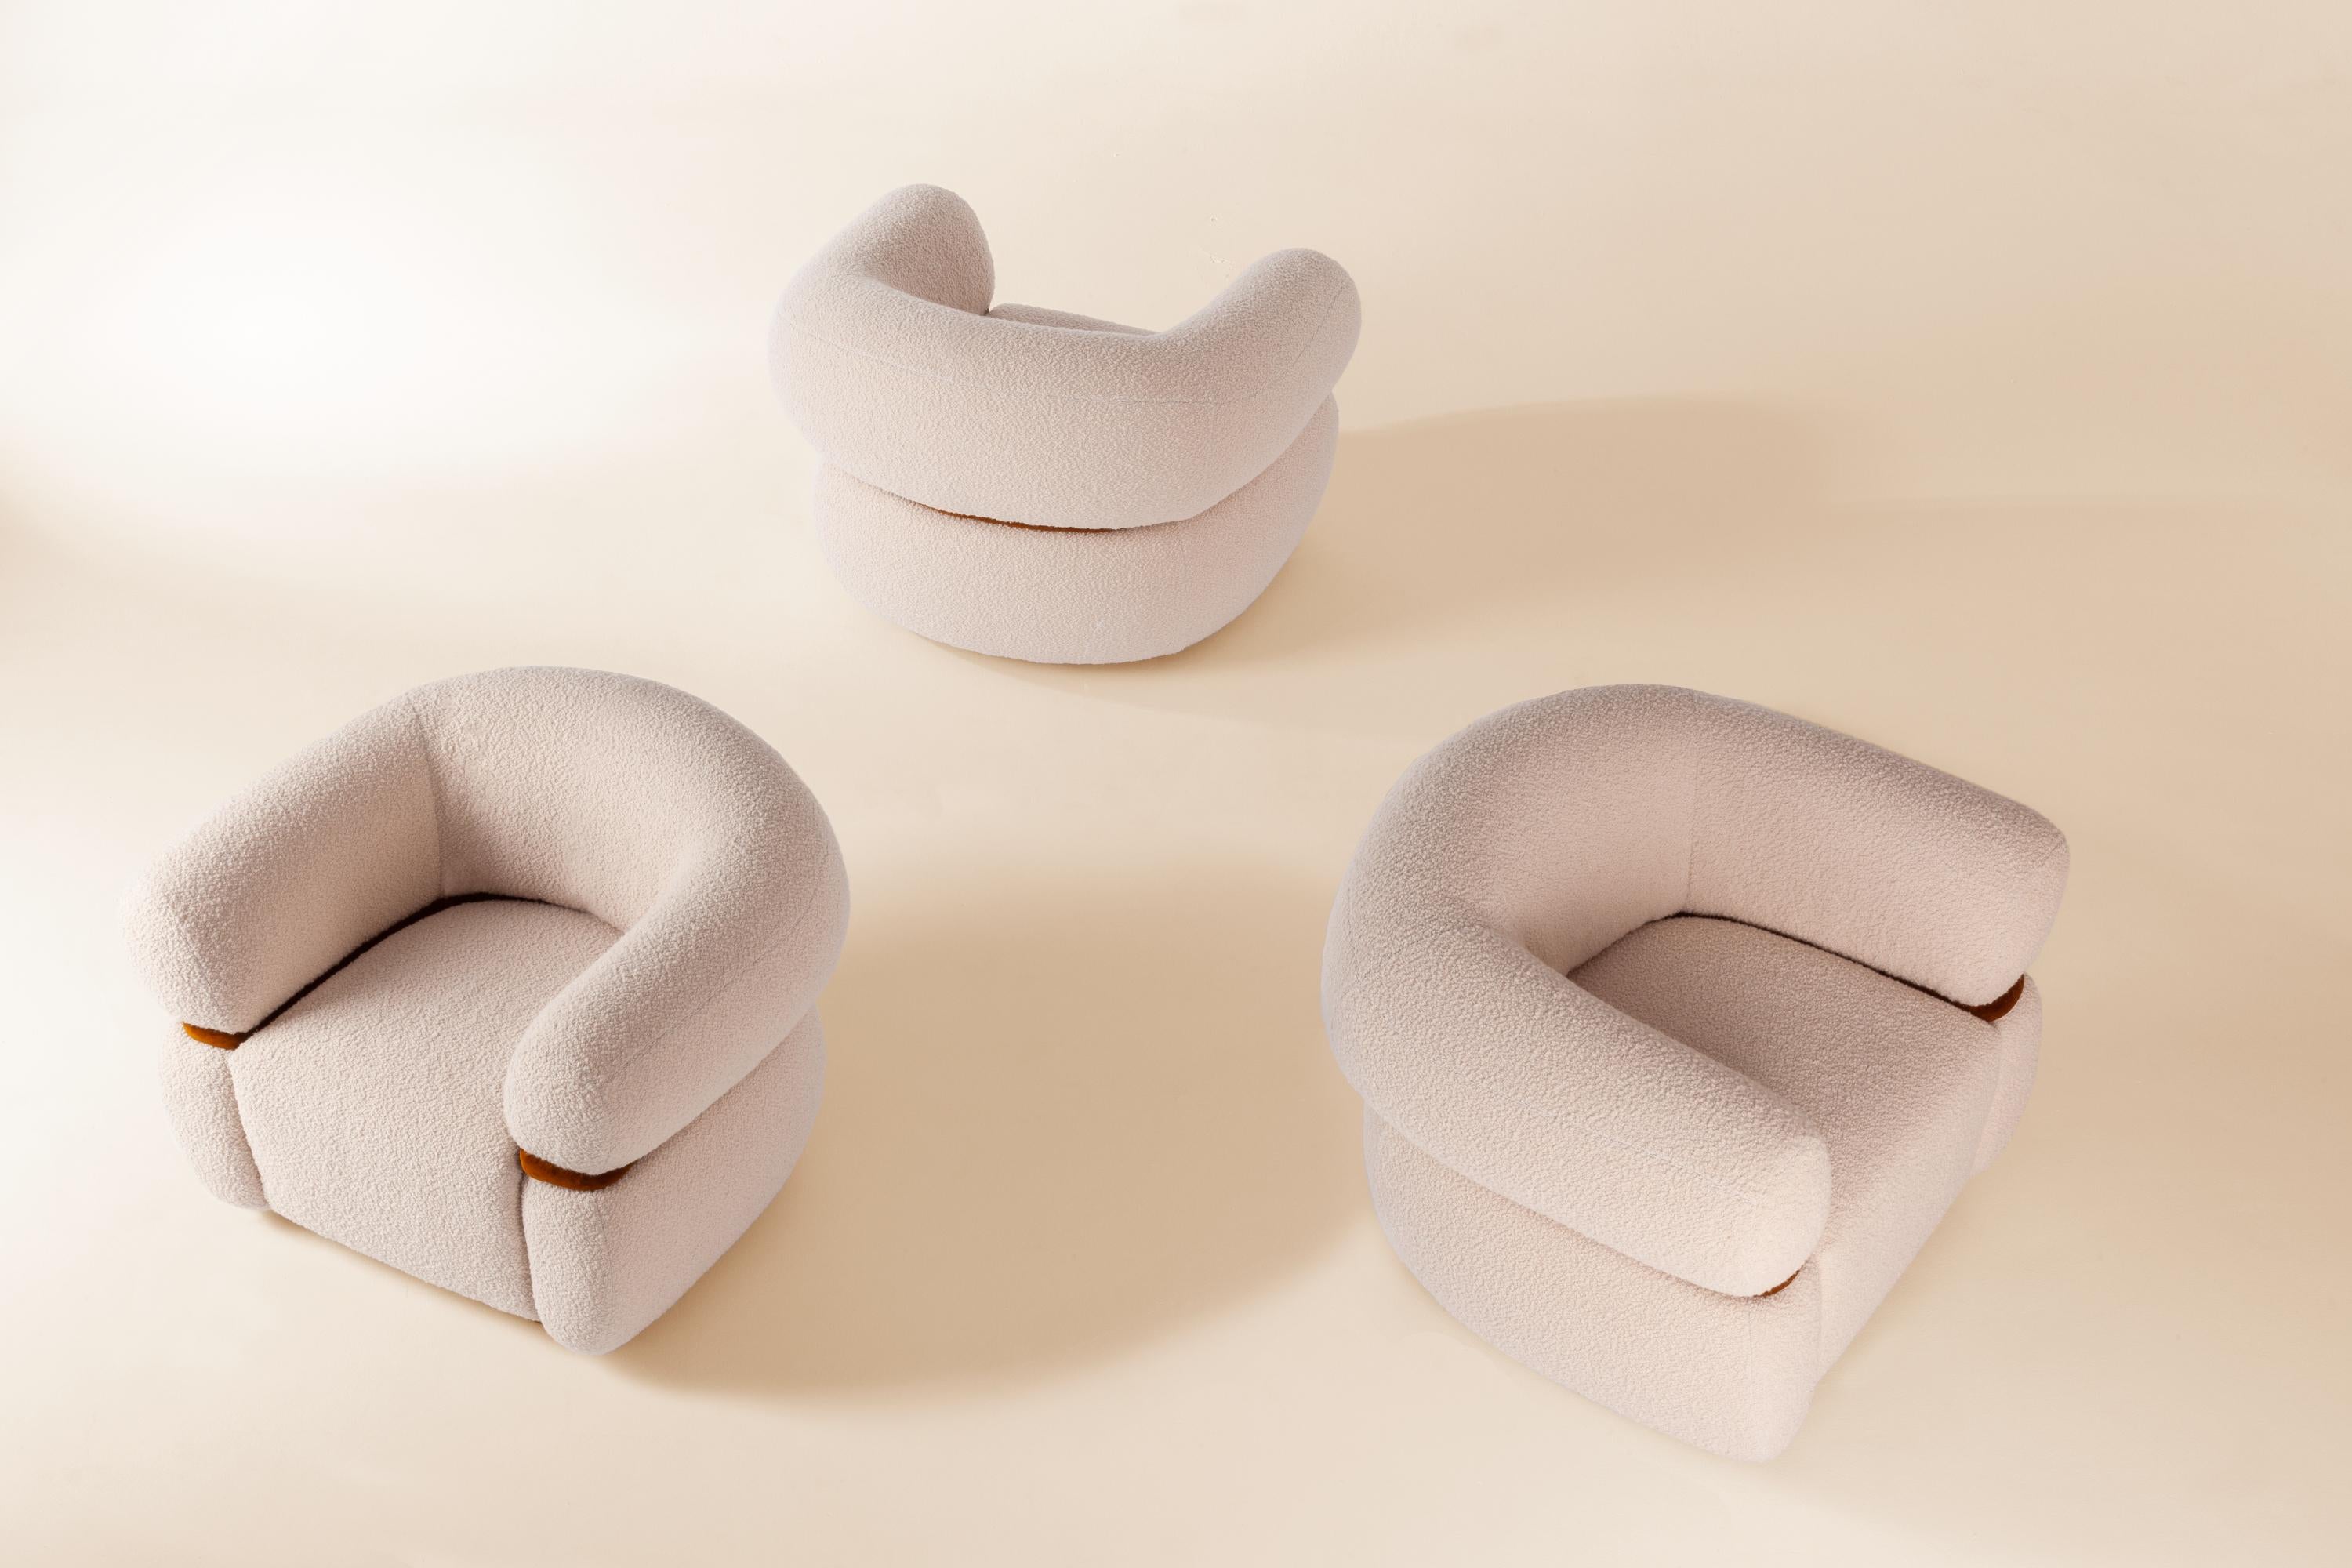 Set of 3 Malibu Armchair by Dooq
The price is for a COM armchair. For the armchair with the fabrics in picture the price is: 3950 euros.
Measures: W 105 cm 32”
D 90 cm 35”
H 77 cm 30”
Seat height 40 cm 16”

Materials: upholstery fabric or